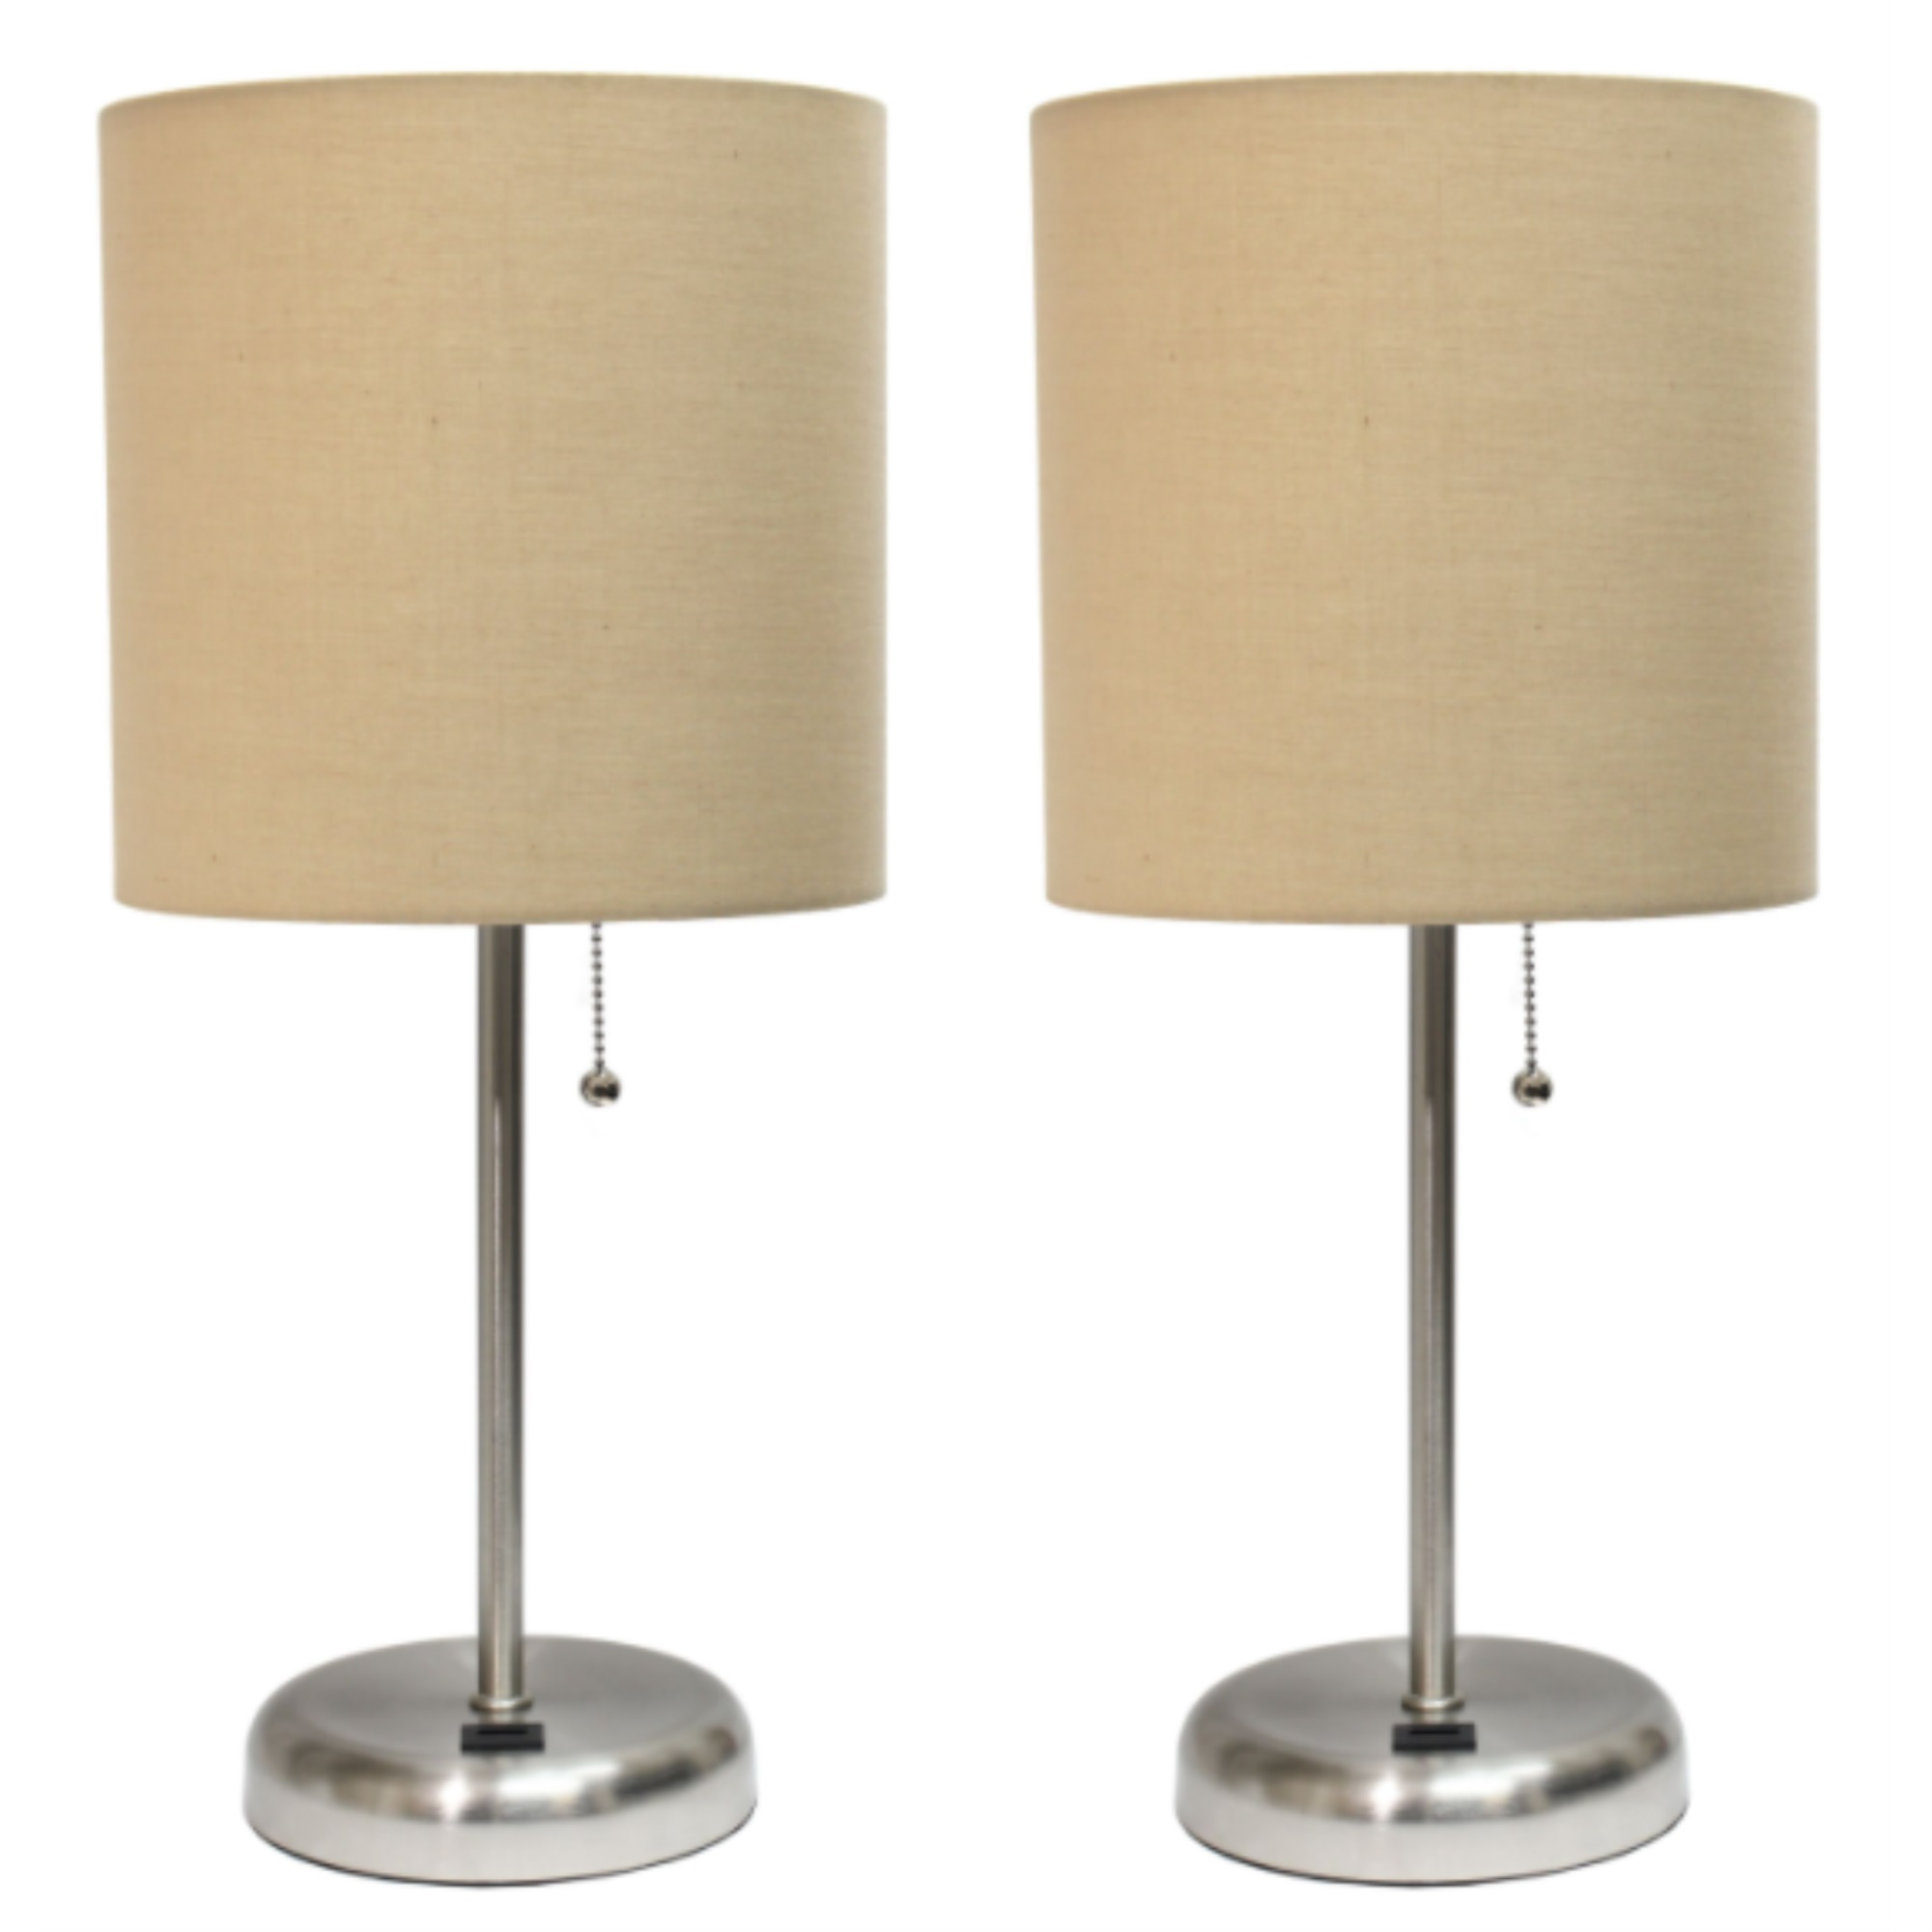 LimeLights Stick Lamp with USB charging port and Fabric Shade 2 Pack Set, Tan